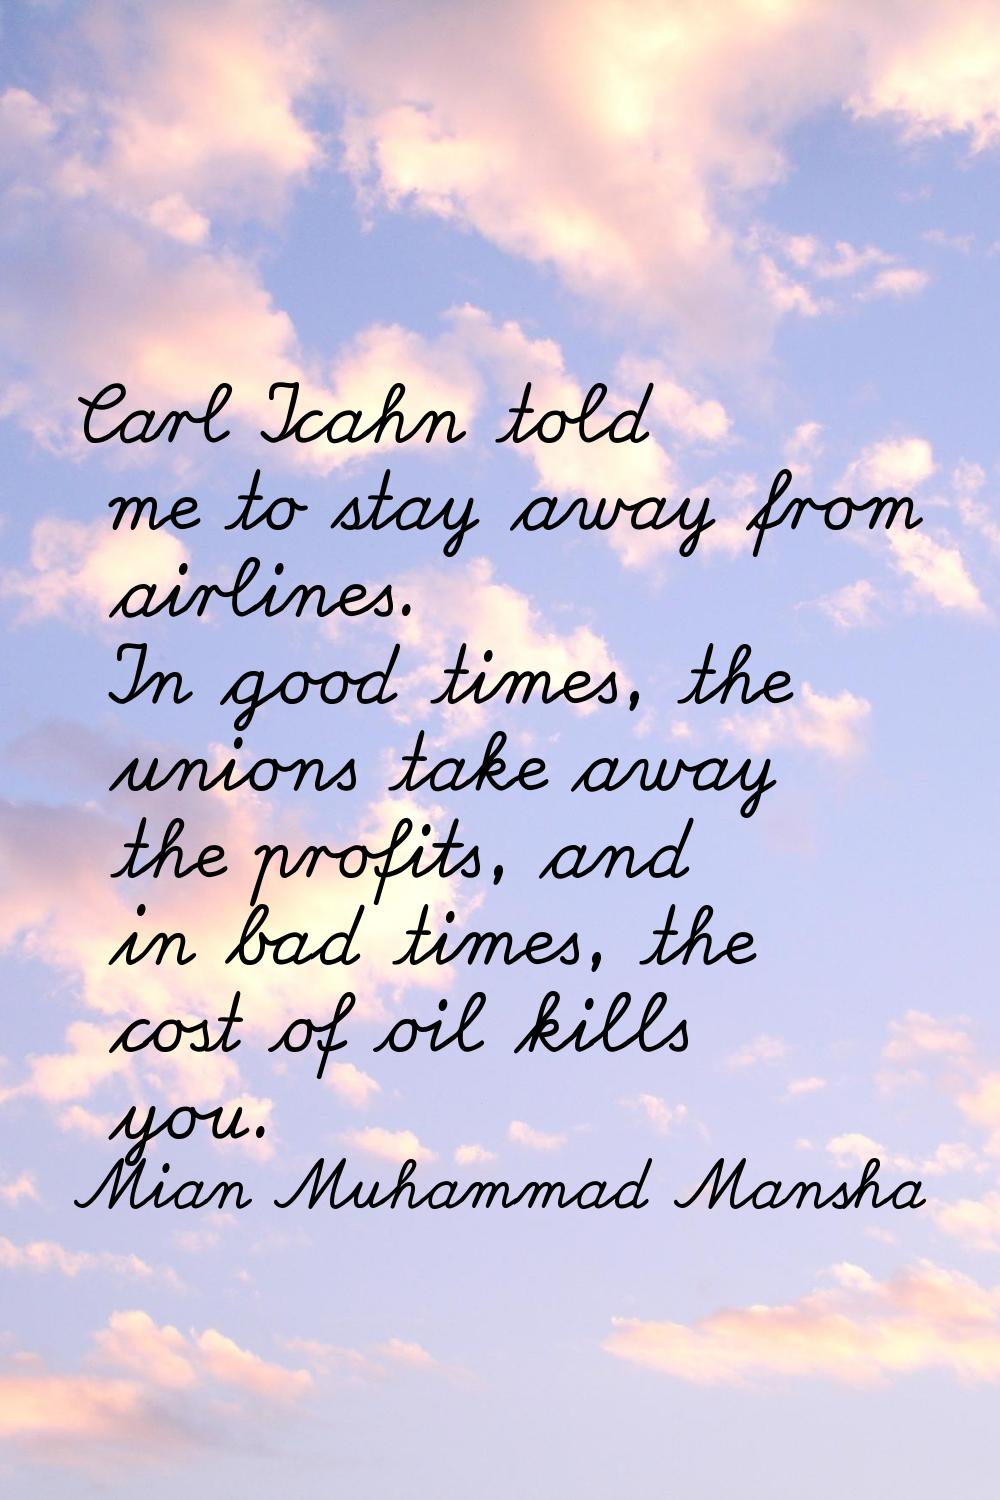 Carl Icahn told me to stay away from airlines. In good times, the unions take away the profits, and